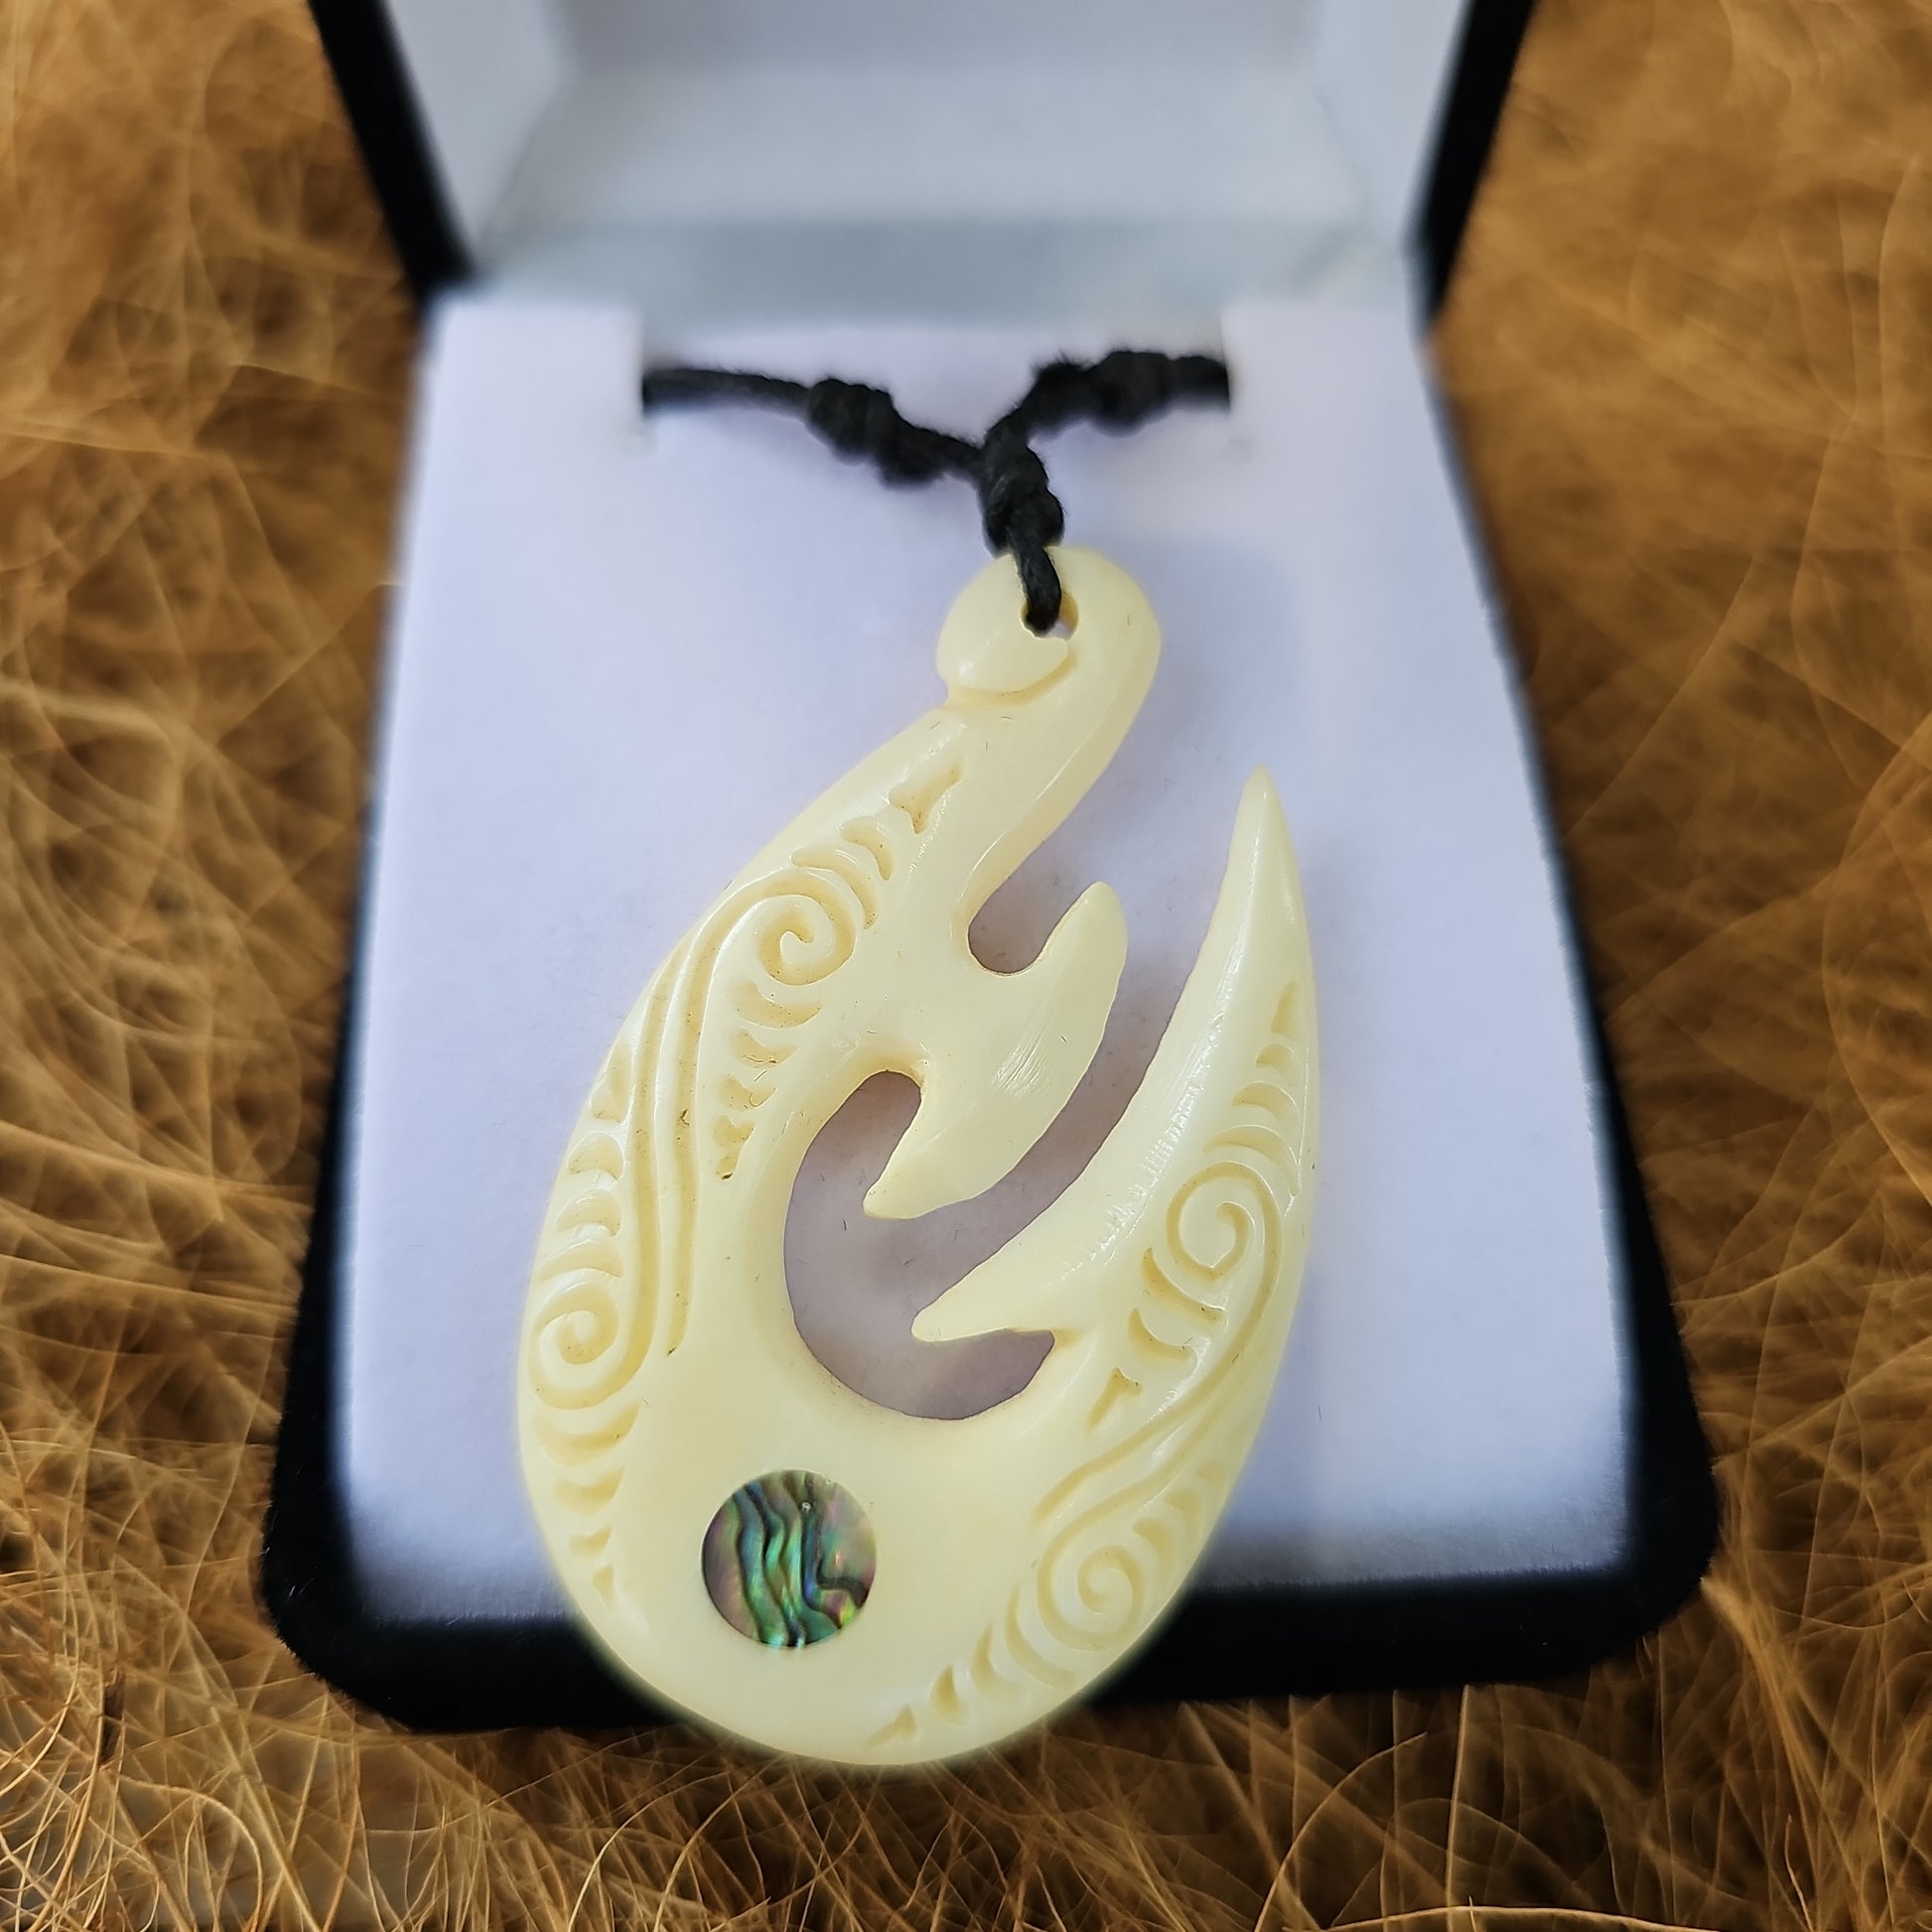 Handcarved Bone Carving Pendant with Paua - Rivendell Shop